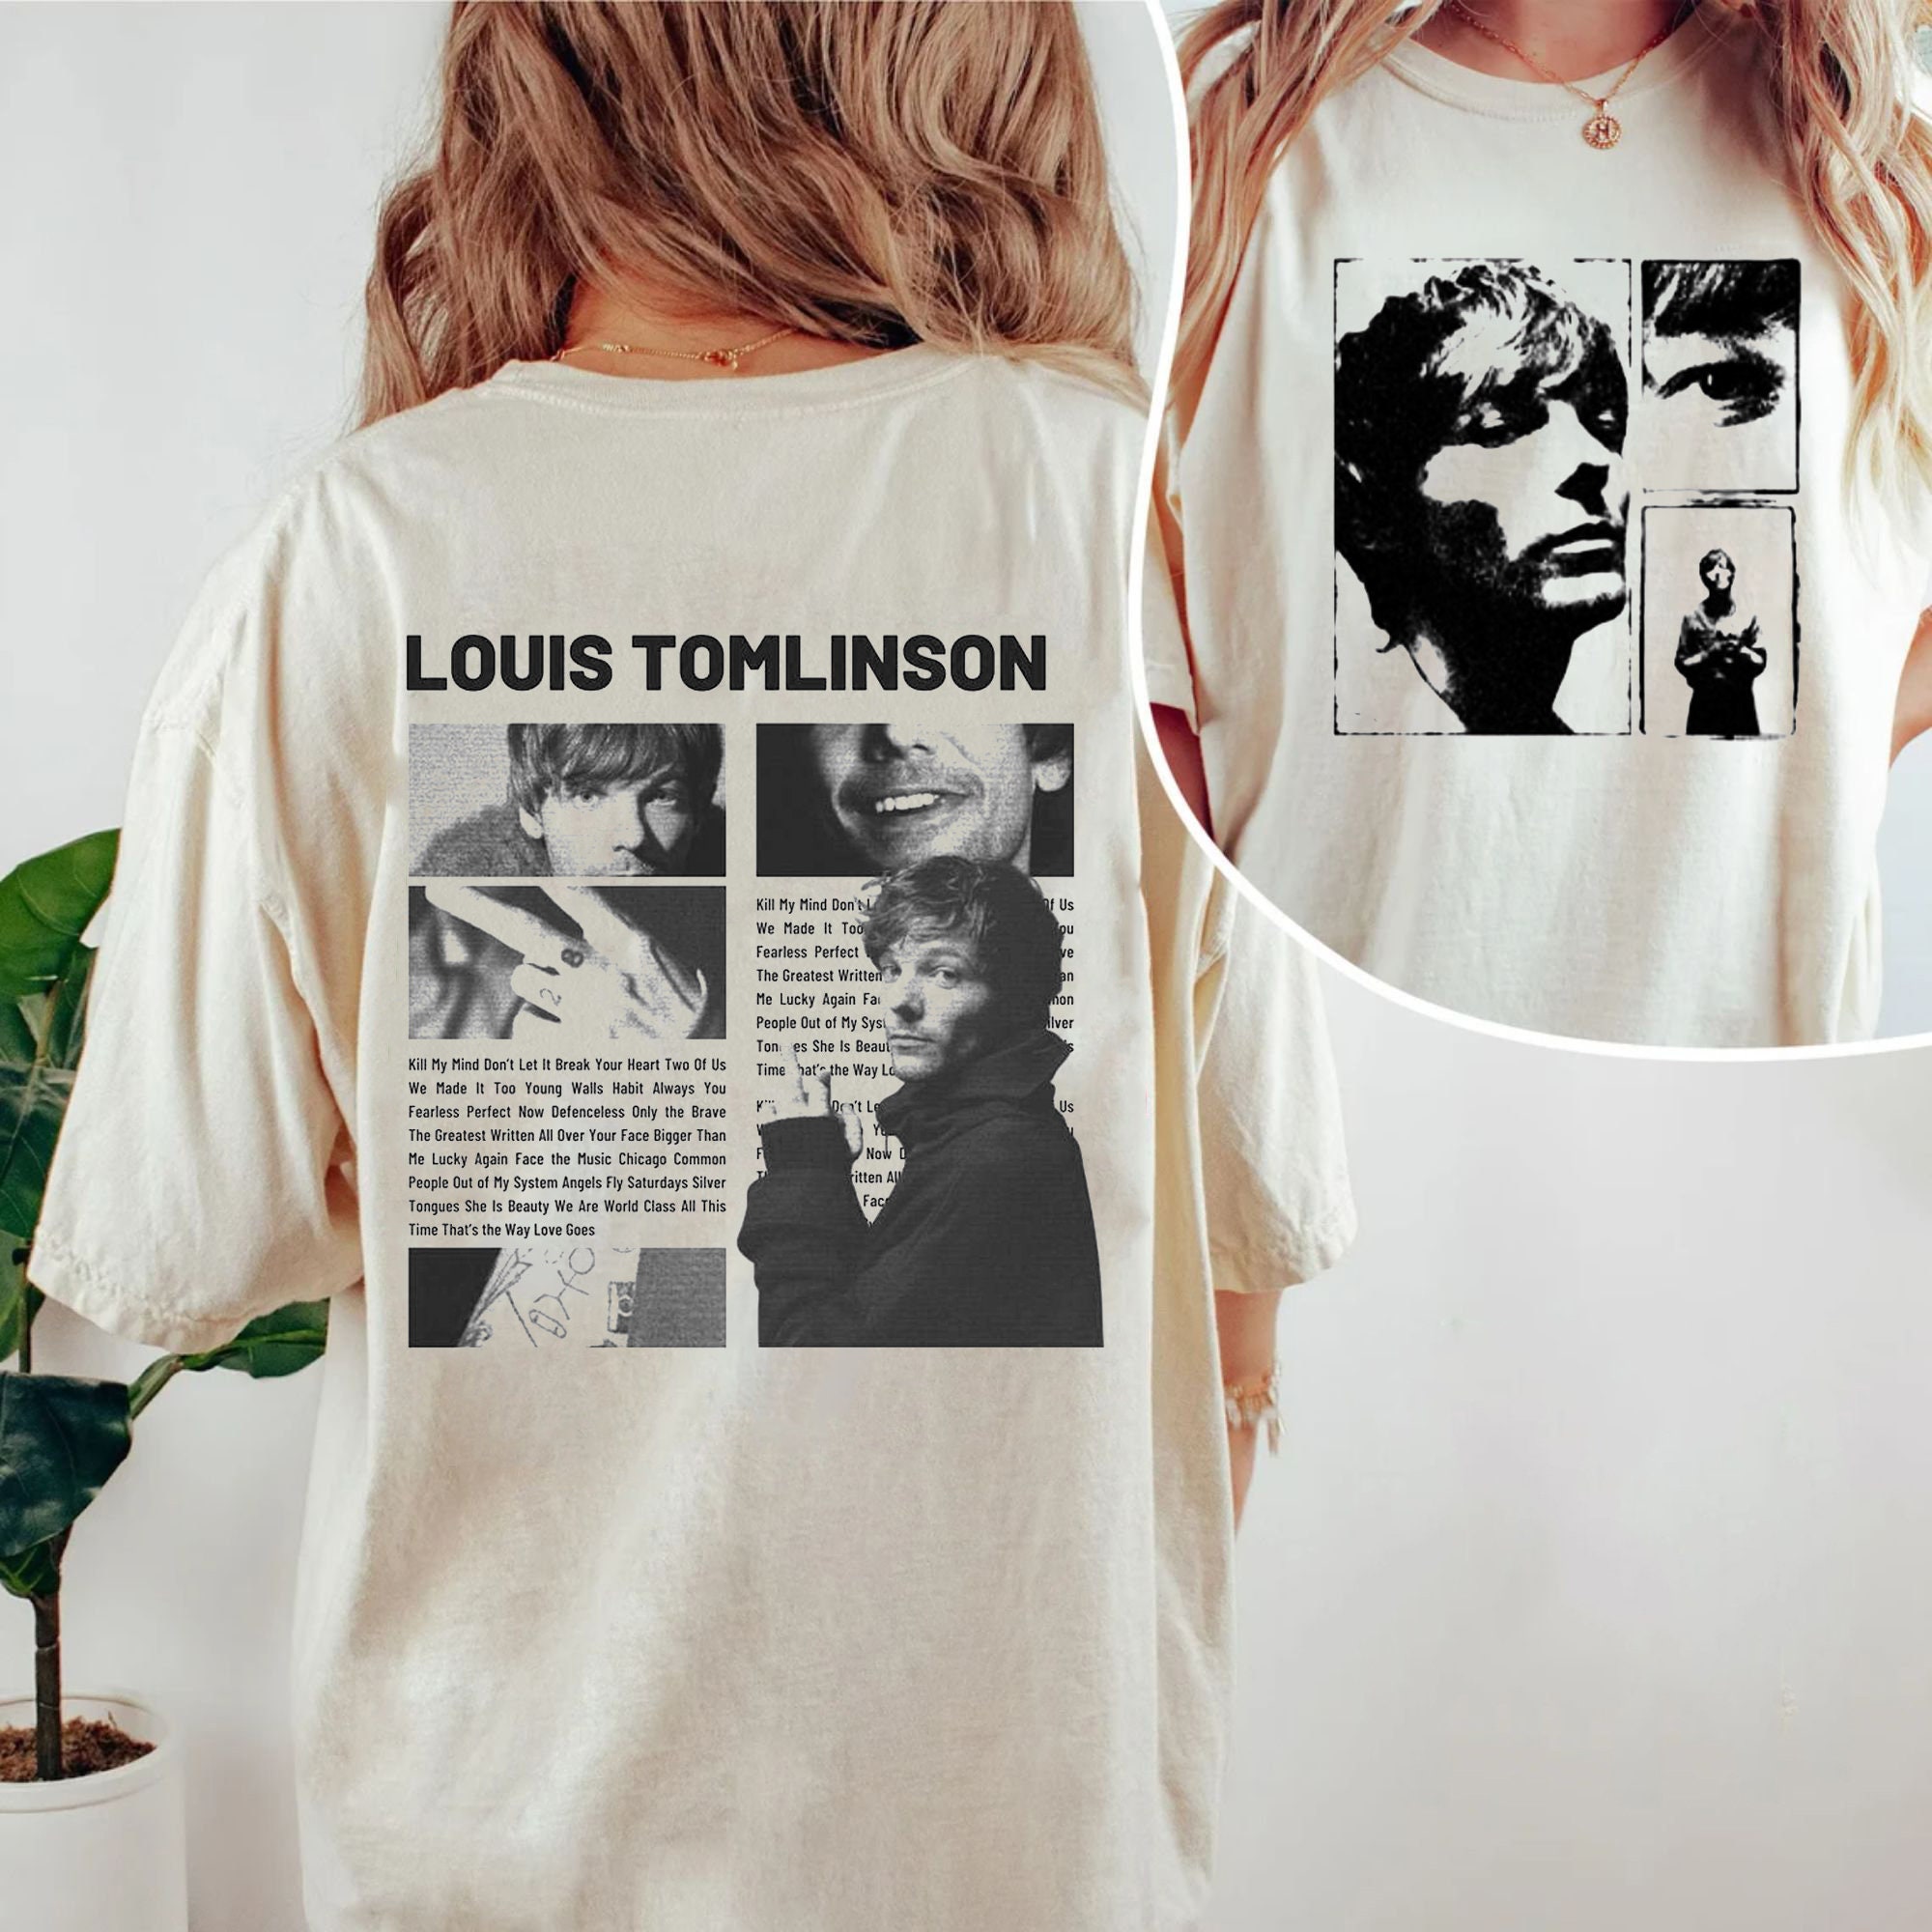 Louis Tomlinson -- For You Box Set (Fan Made) by xsneakernight on